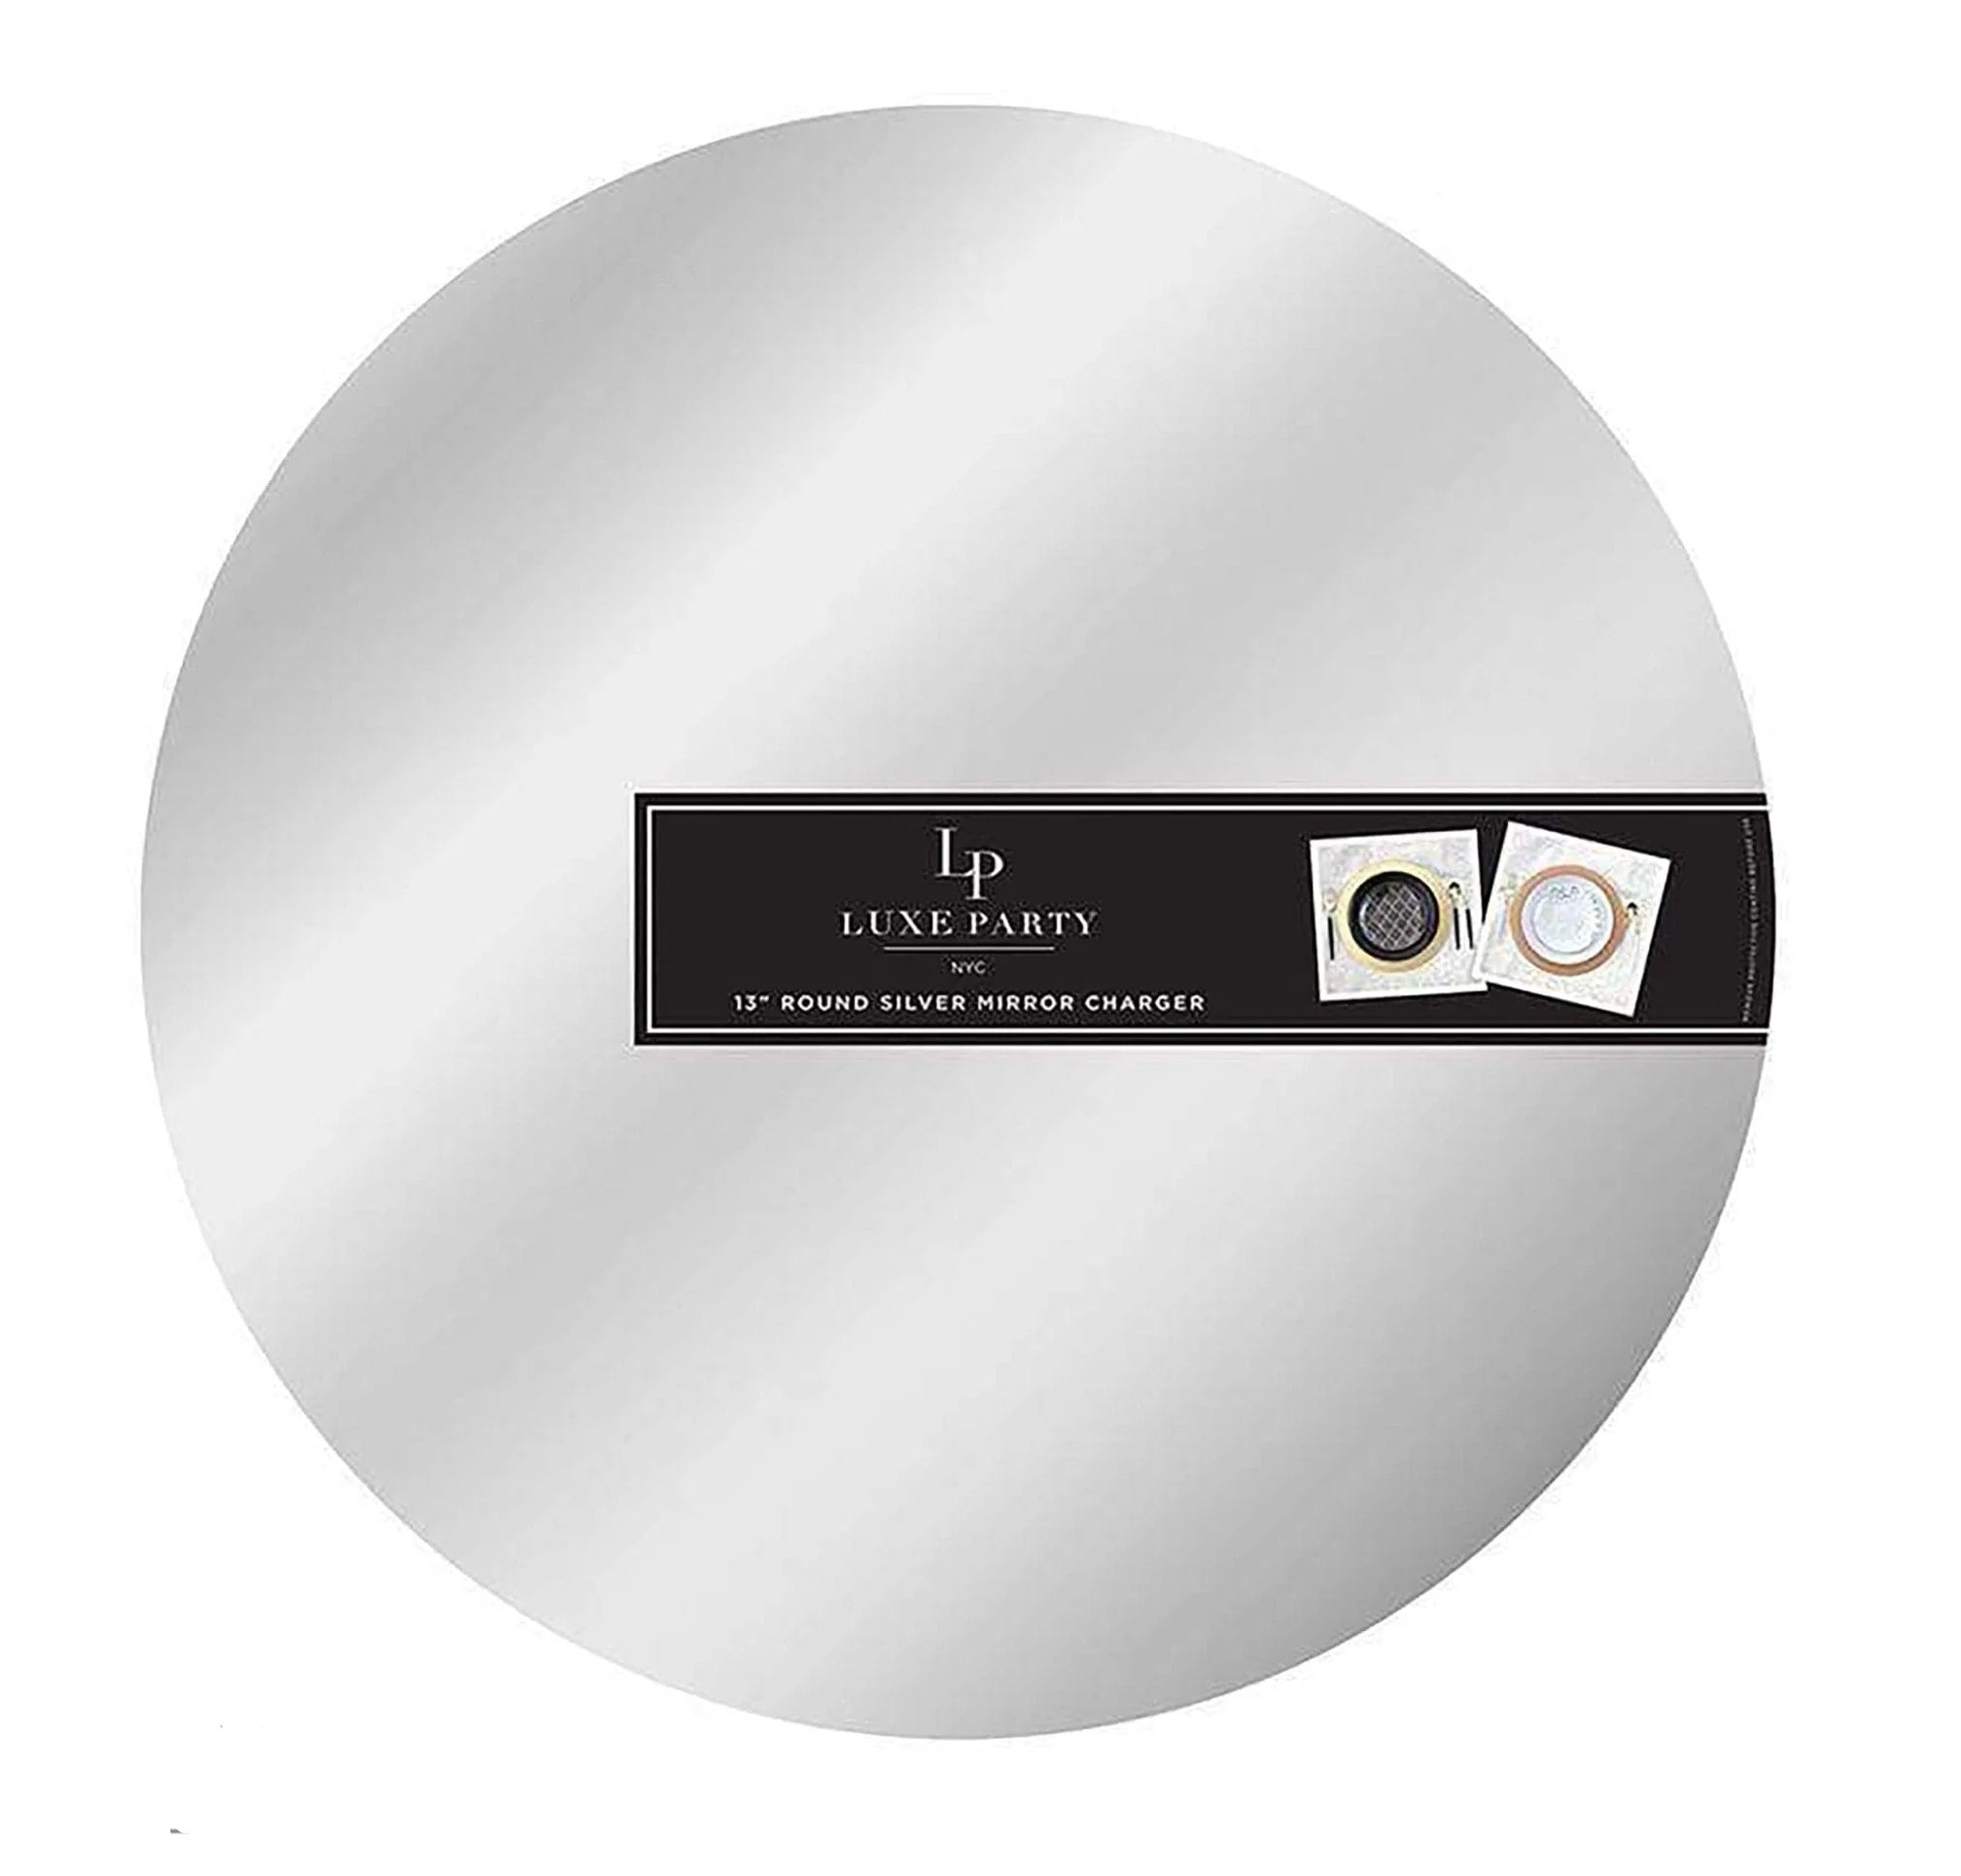 Luxe Party Silver Round Lightweight Mirror Charger Plate 13"